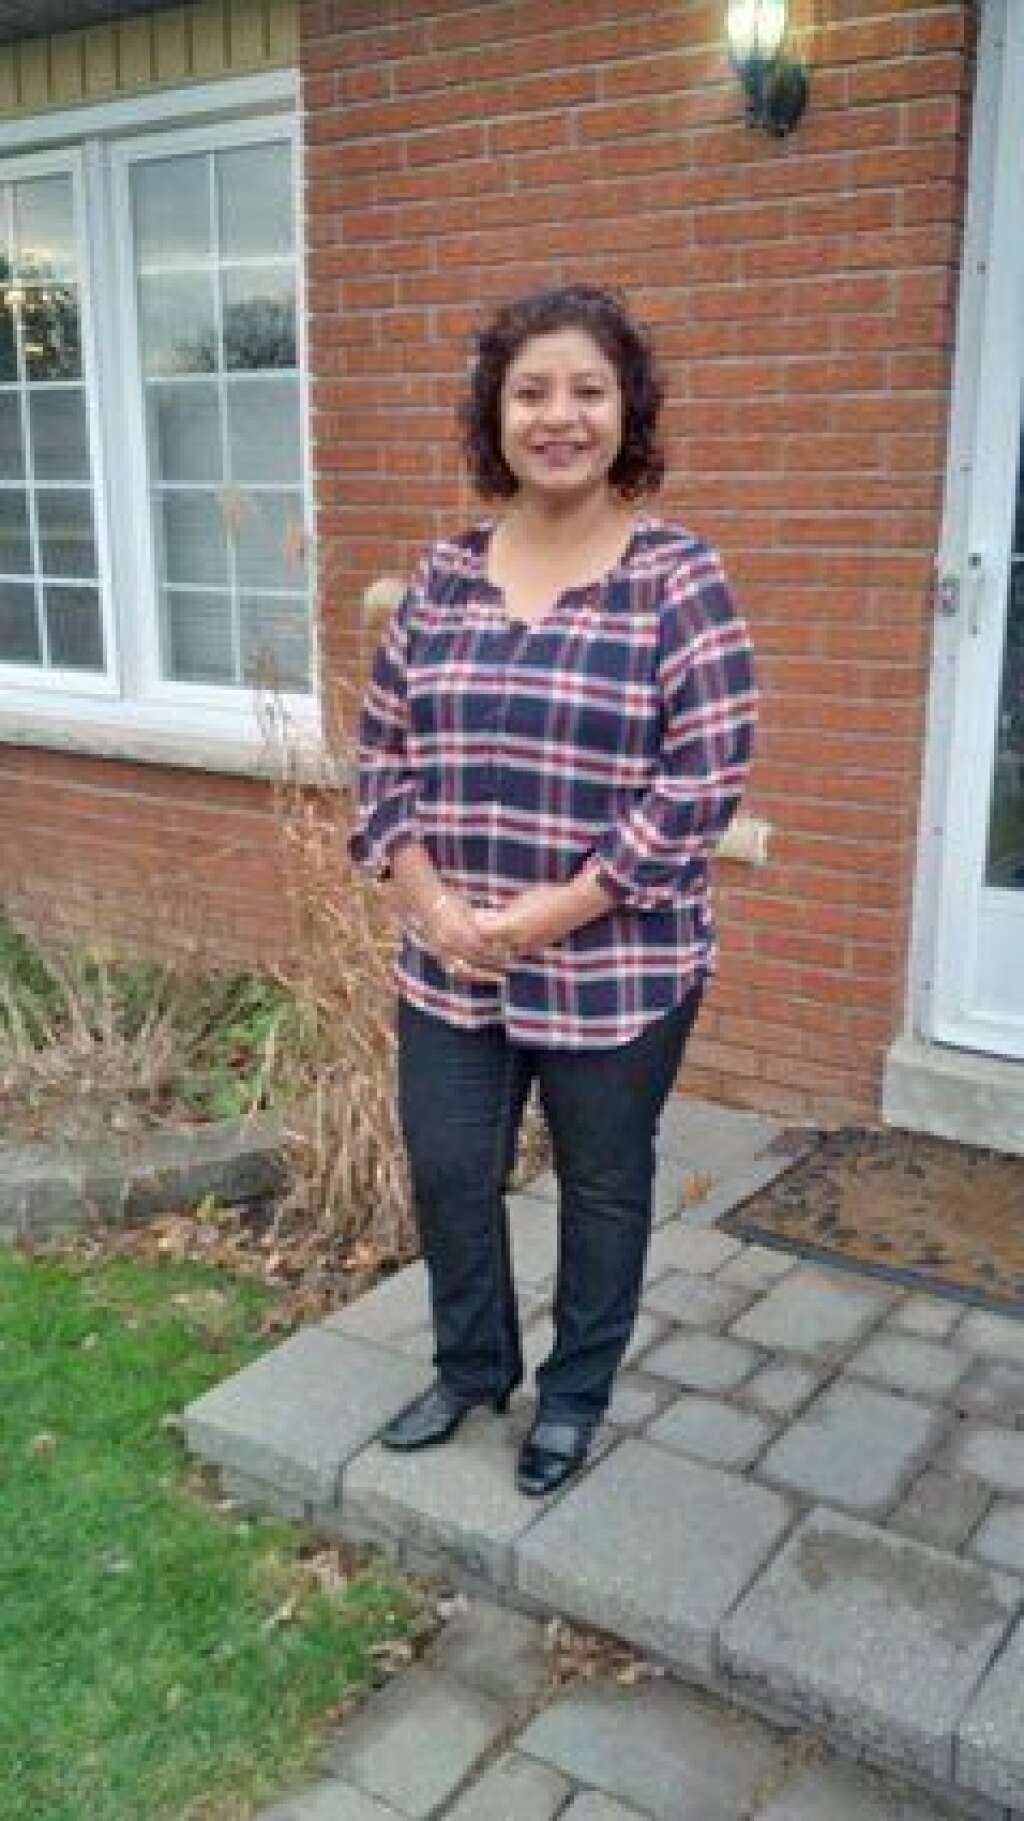 Harpreet AFTER - Total weight lost: 50 pounds. <a href="http://www.huffingtonpost.ca/2015/12/01/weight-lost_n_8692050.html" target="_blank">Read her story here.</a>